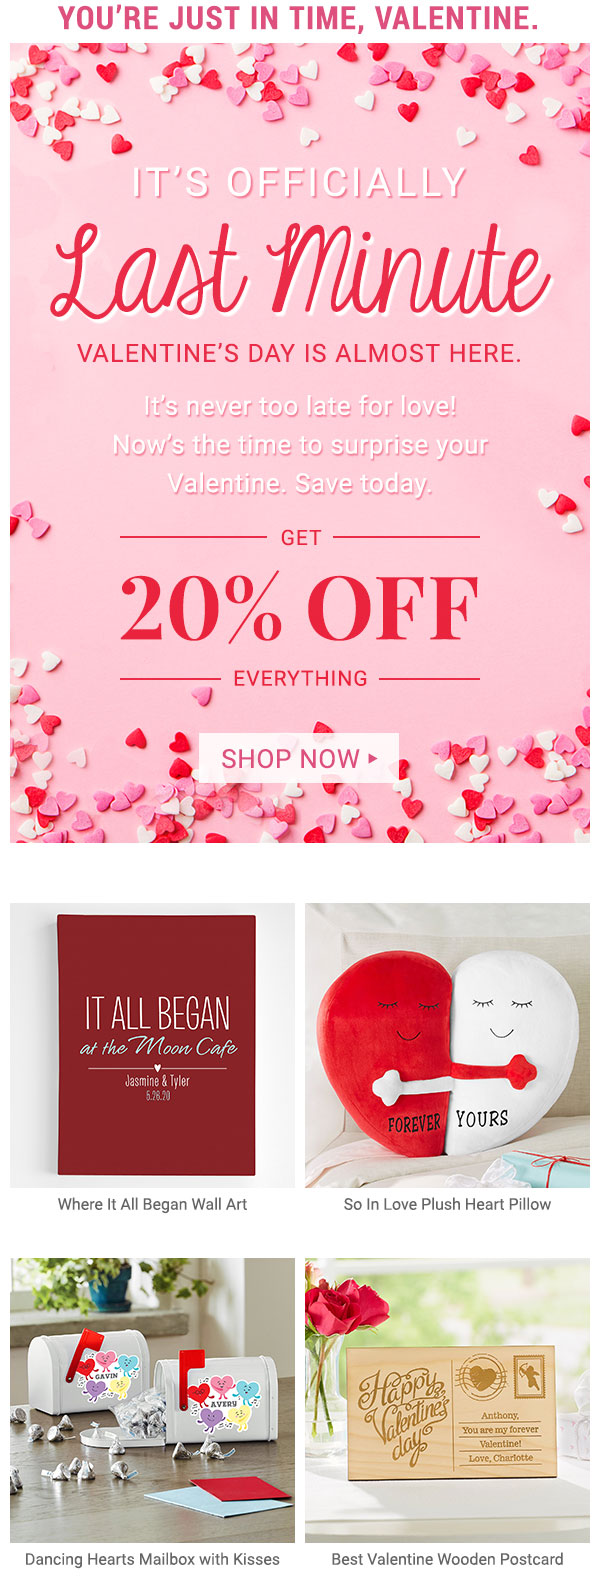 It???s Officially Last Minute! Save 20% on Everything